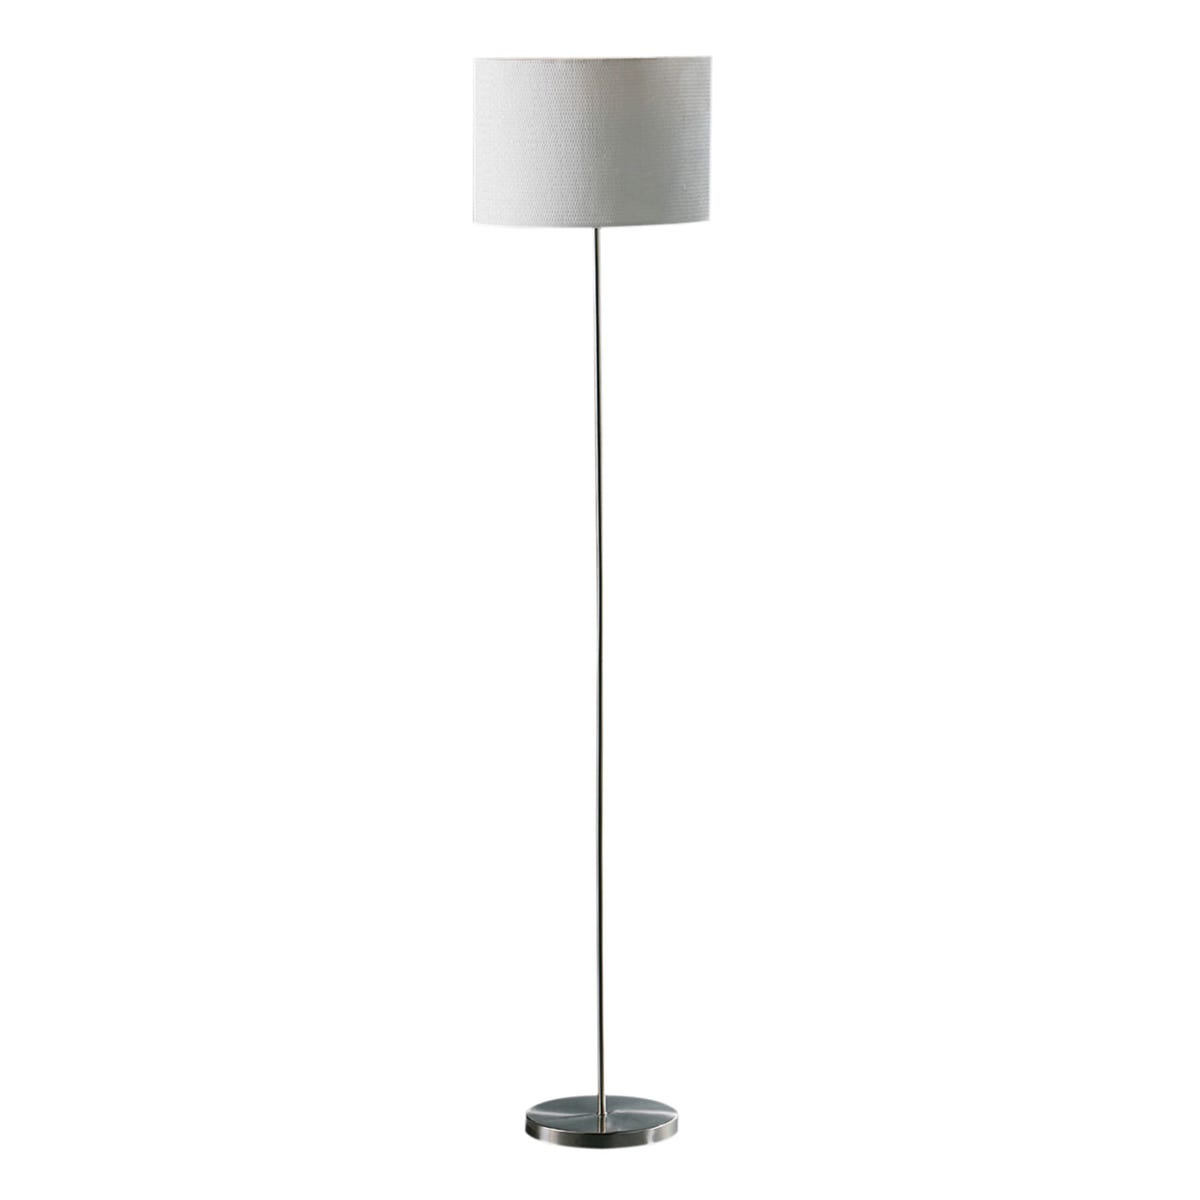 Premier Housewares Forma Chrome Effect Floor Lamp with Cream Waffle Effect Shade